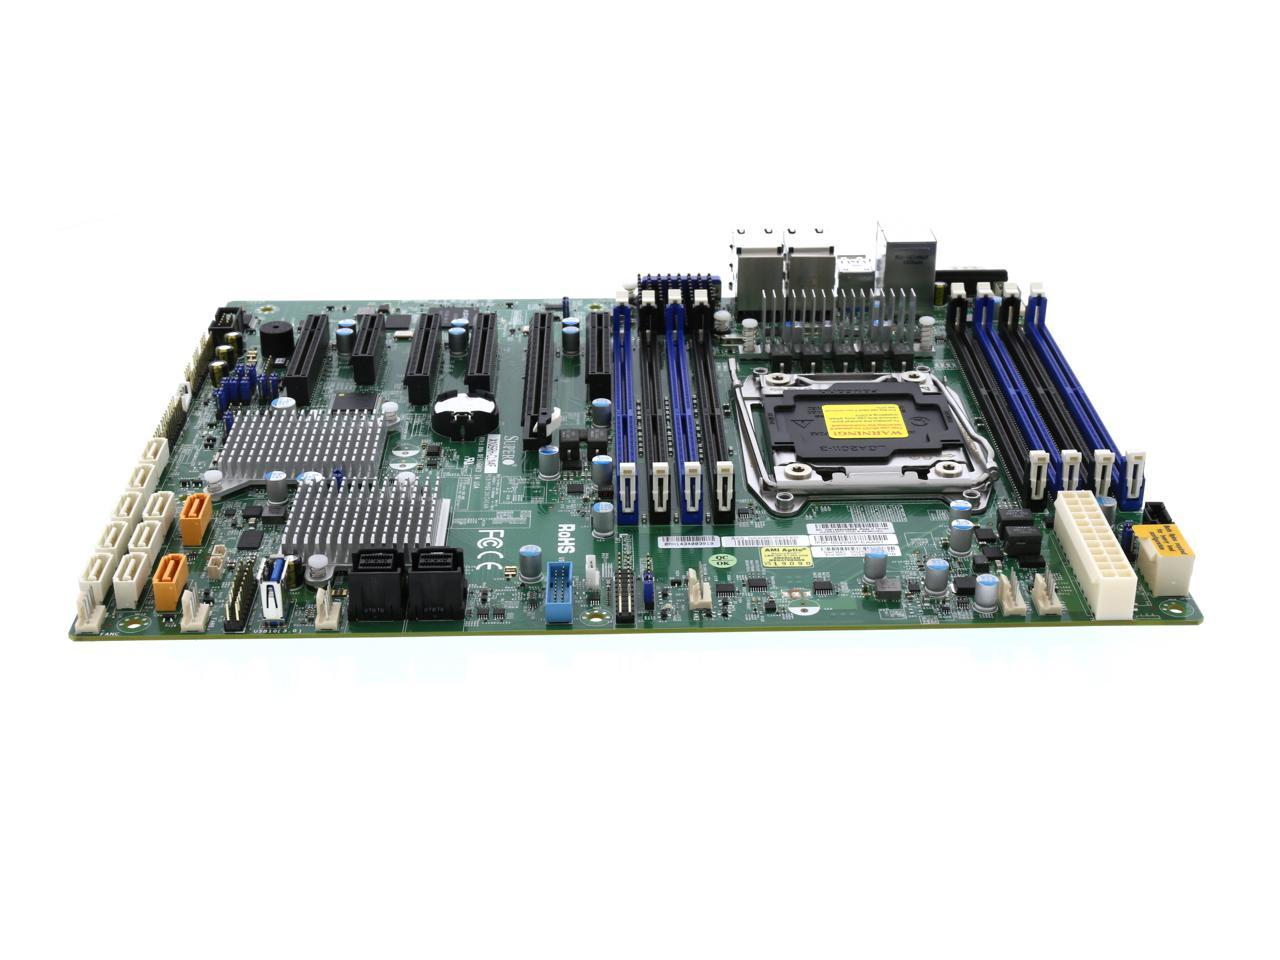 Supermicro X10srh-cln4f Motherboard With Intel C612 Chipset 